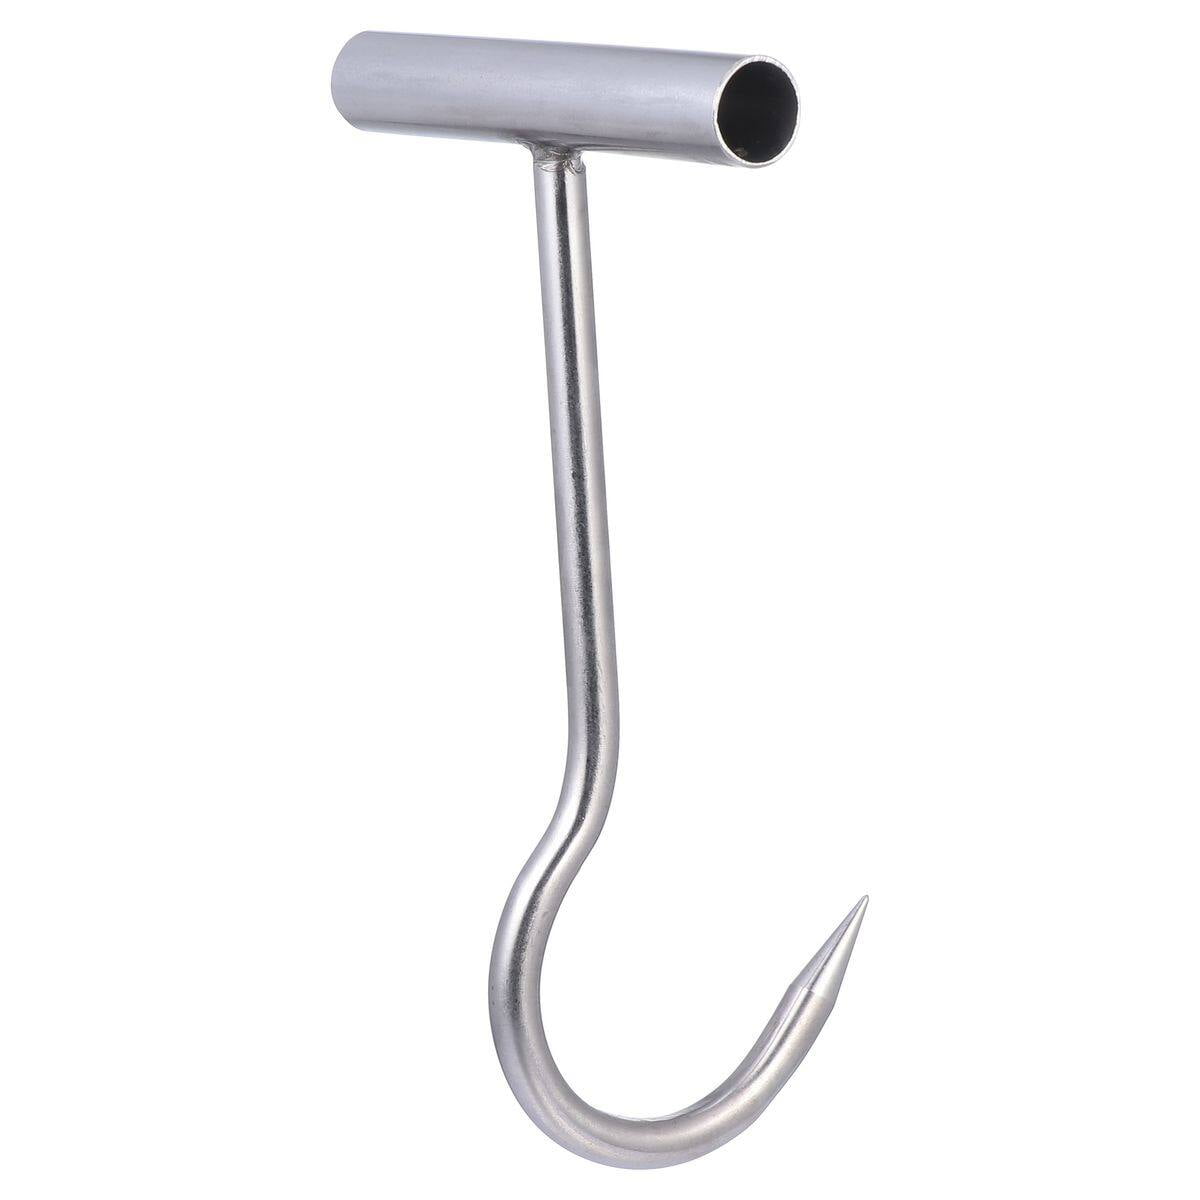 Stainless Steel Meat Apollo React Hooks Hanging With Sharp Tip For Butcher  Shop Durable Kitchen Baking Tools Practical 220510 From Youngstore09, $8.64